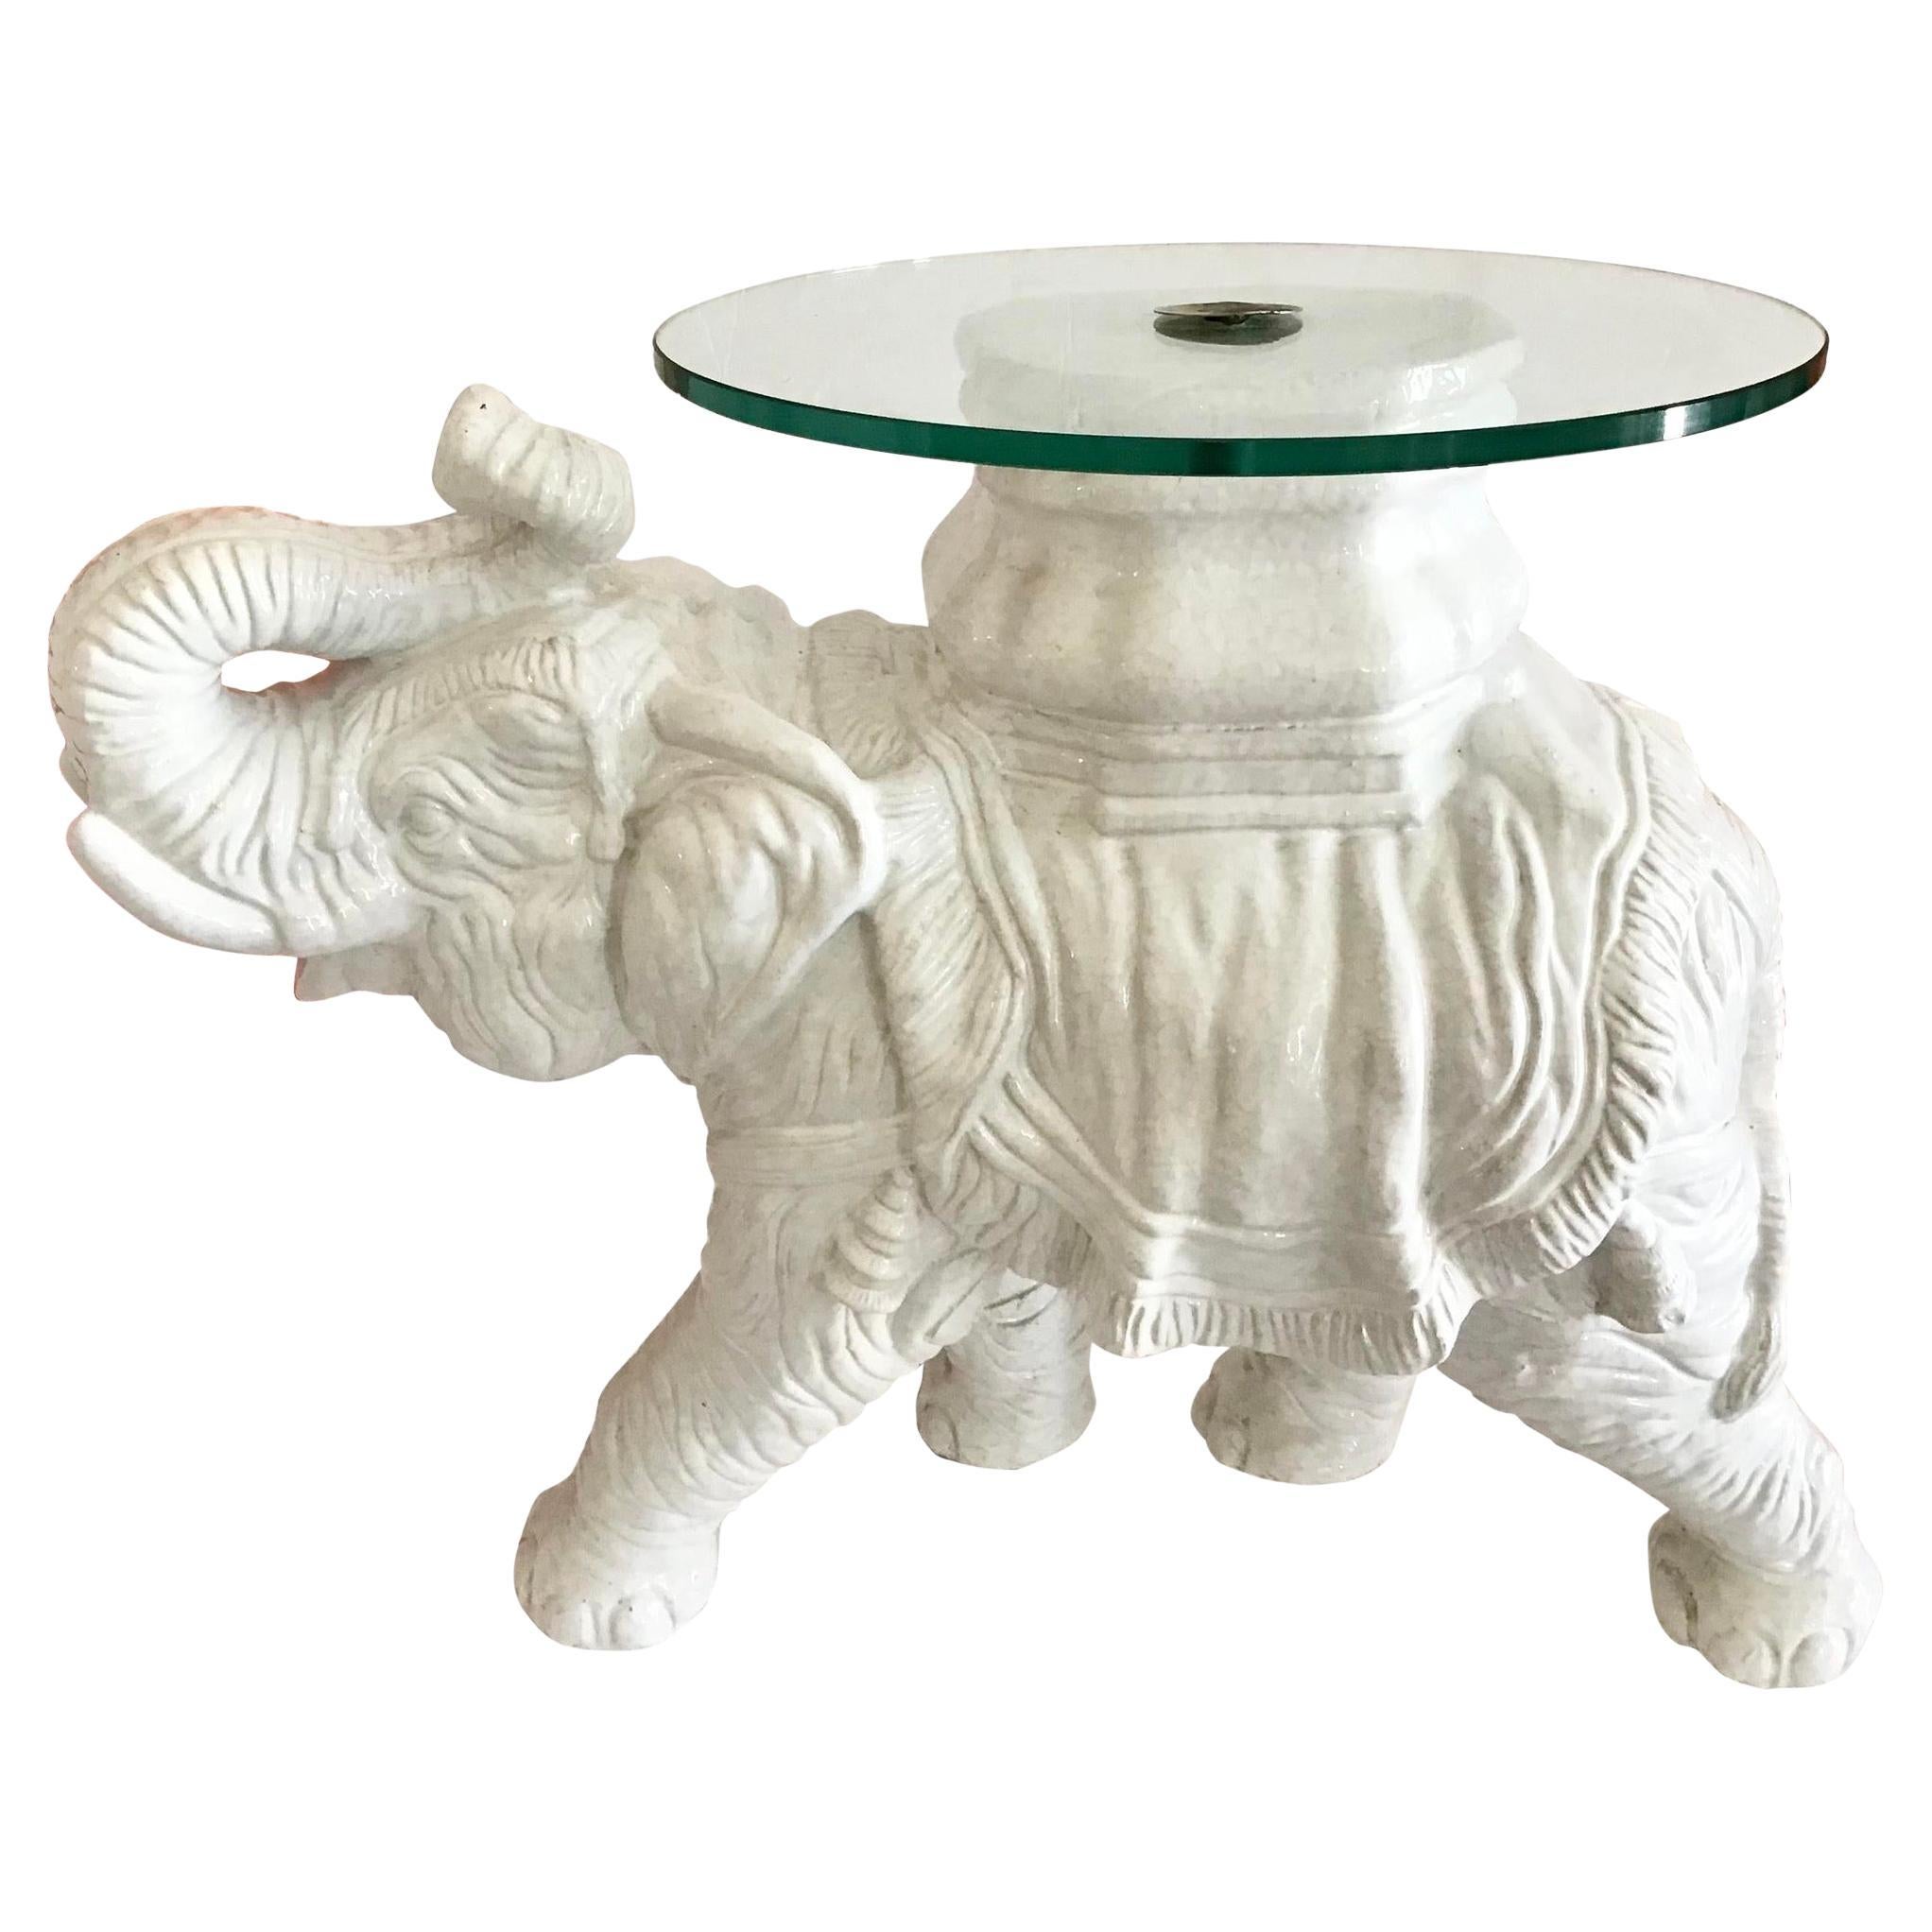 White Elephant Glazed Terra Cotta Cocktail Table with Glass Top